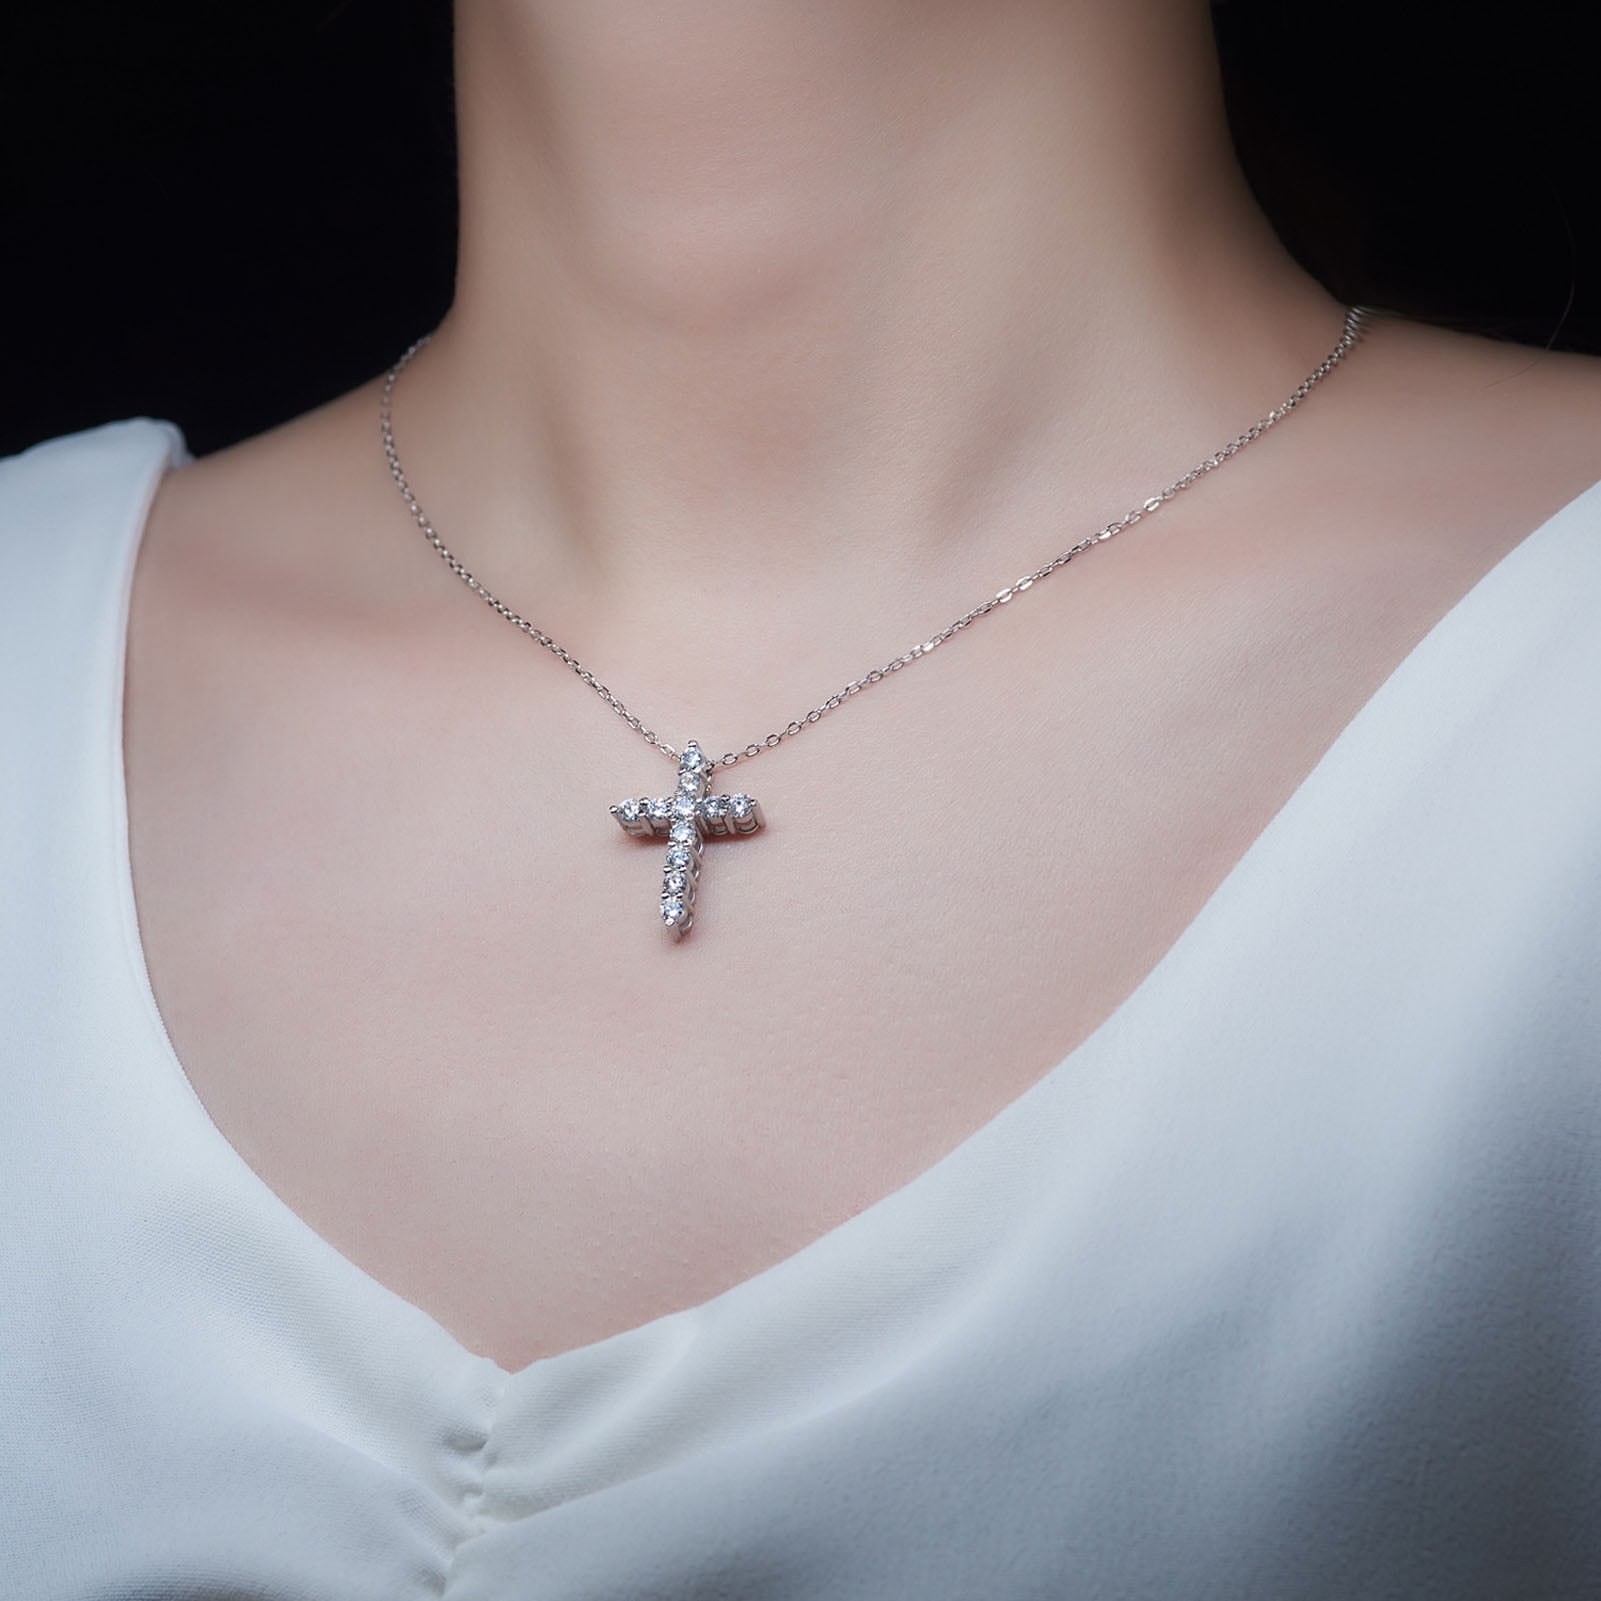 Nail Cross Necklace John 19:30 Stainless Steel